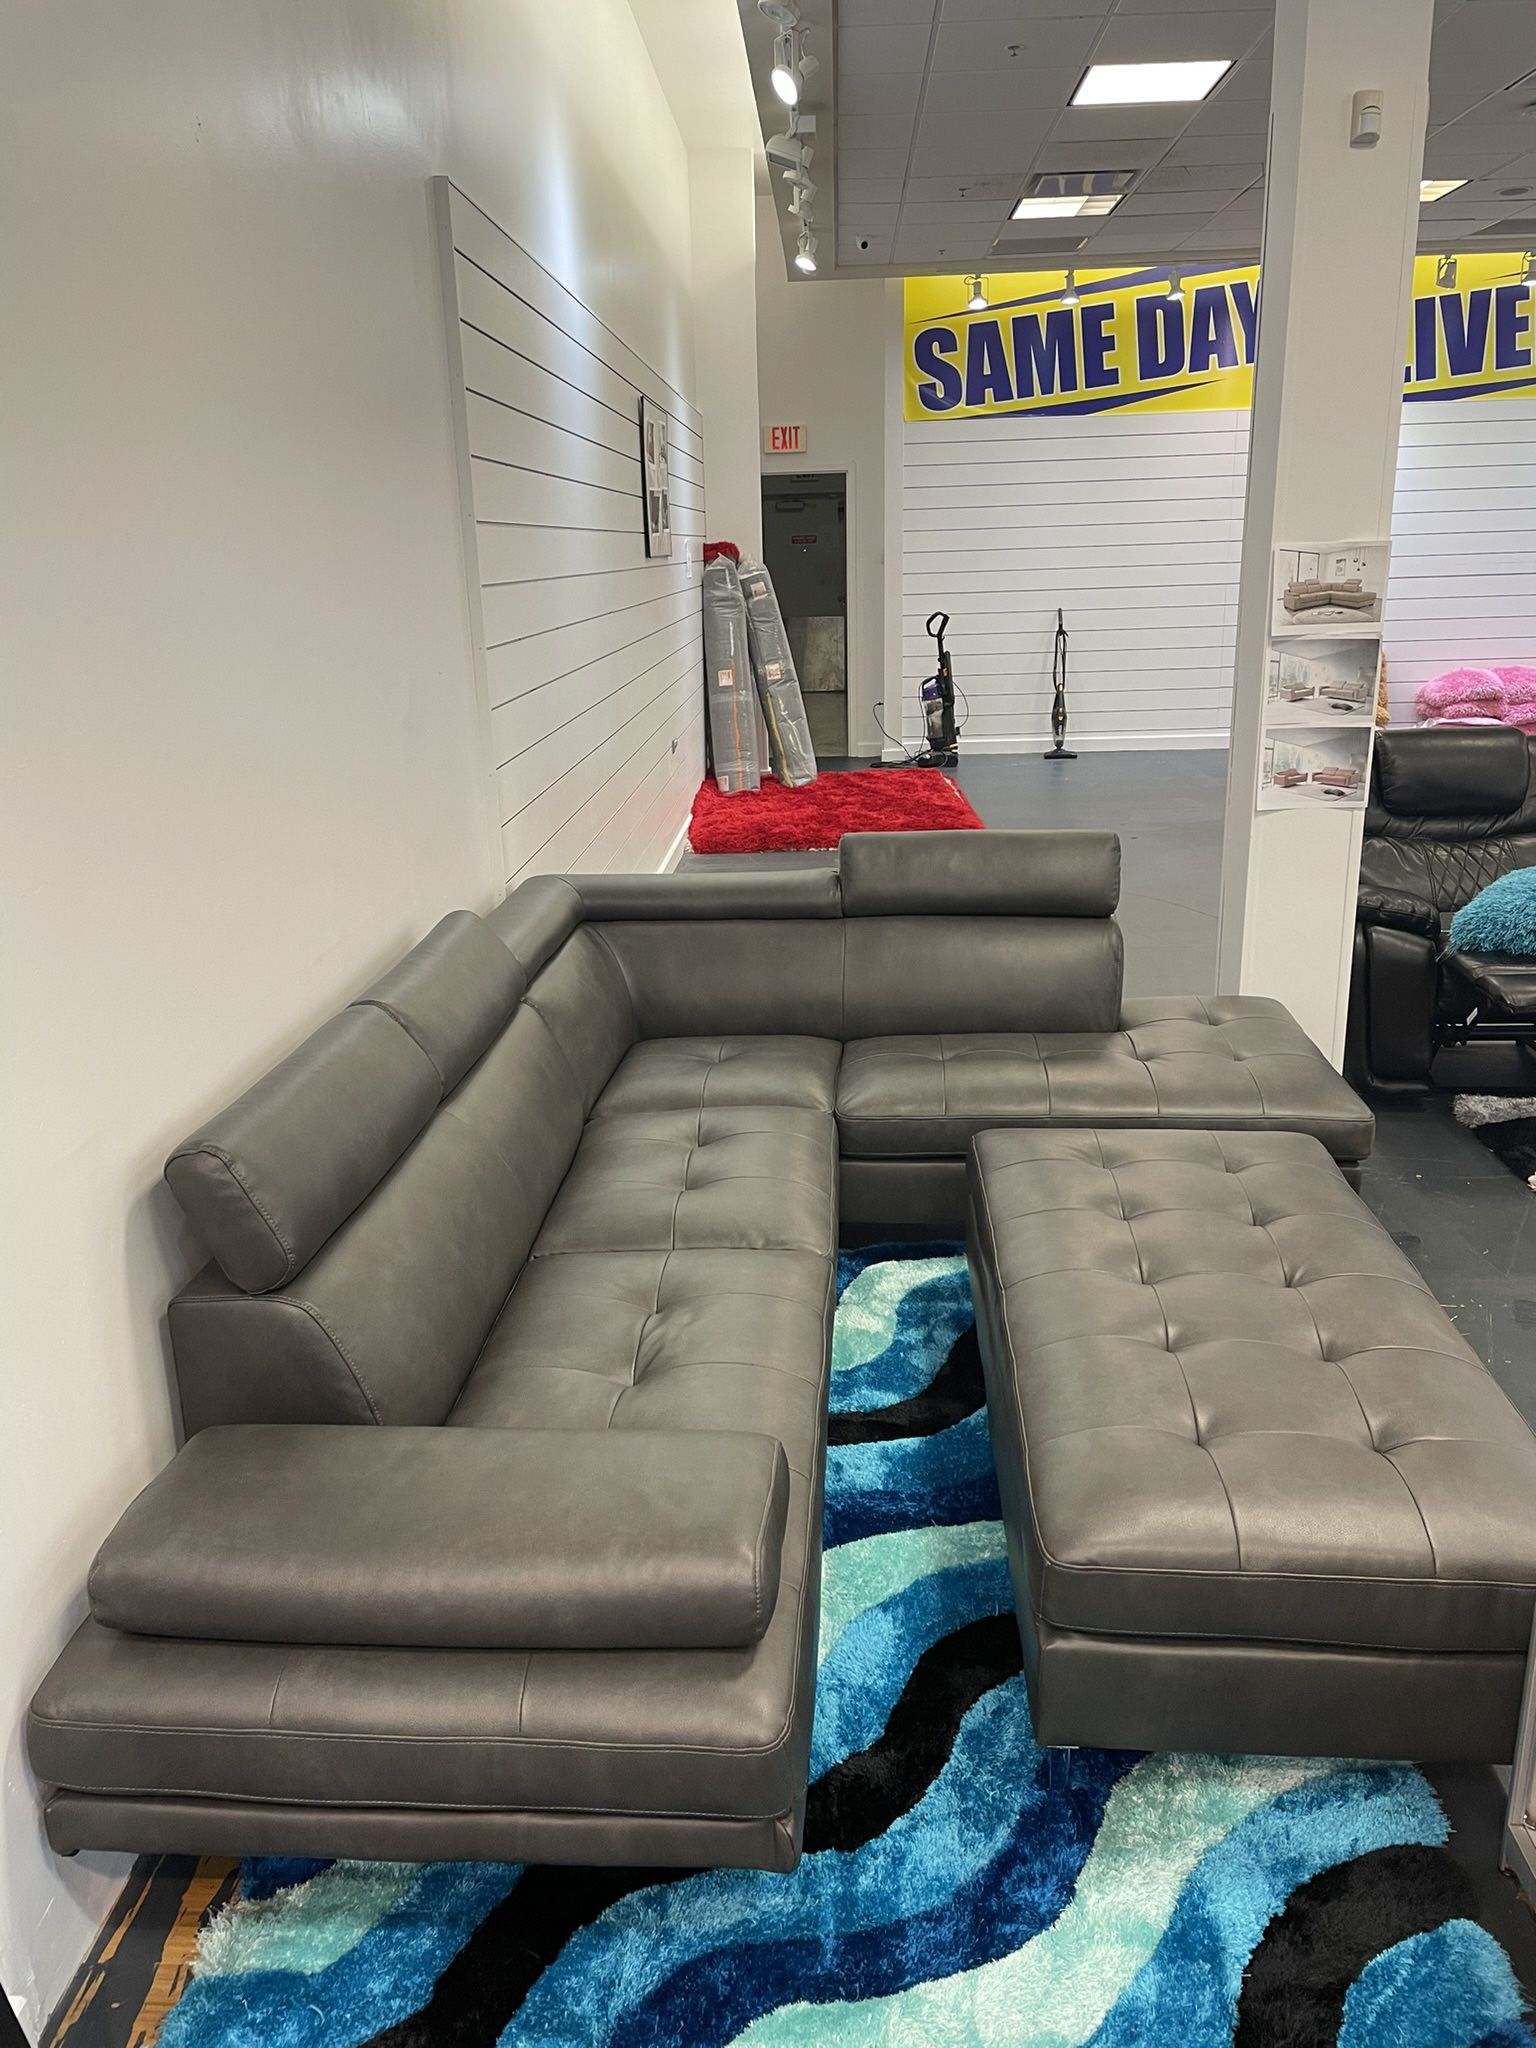 Ibiza Gray Sectional With Ottoman Only $799. Easy Finance Option. Same-Day Delivery.